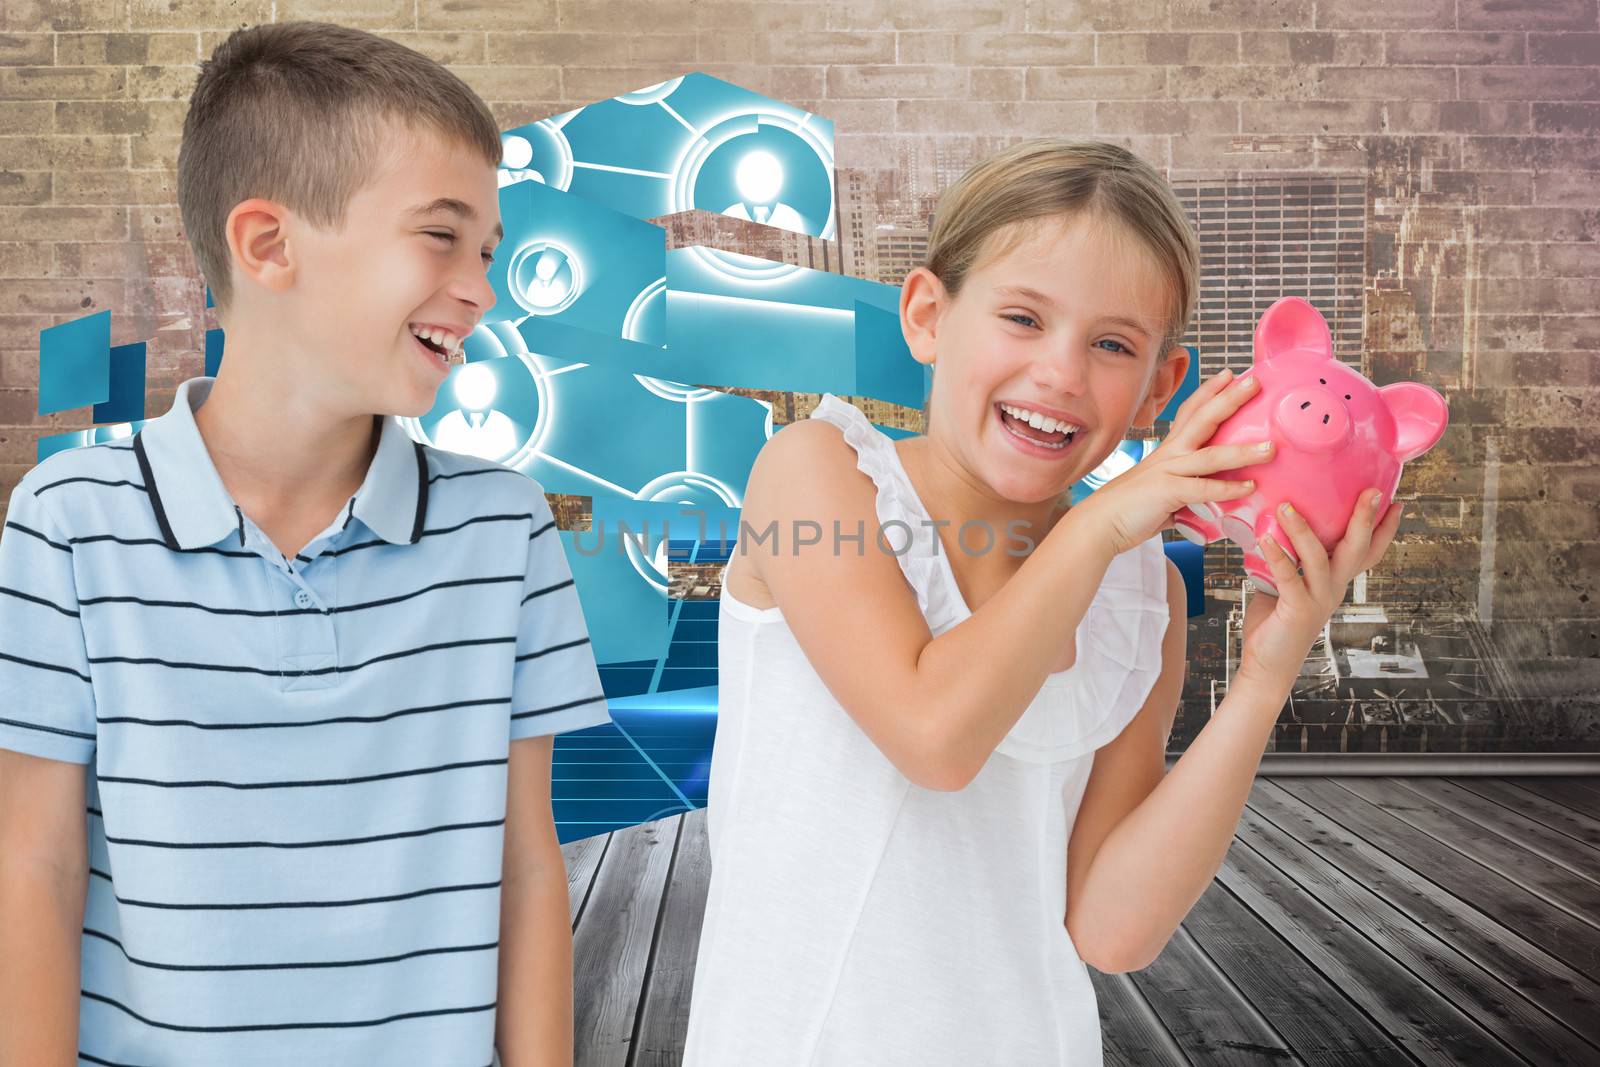 Smiling young girl holding piggy bank against city scene in a room